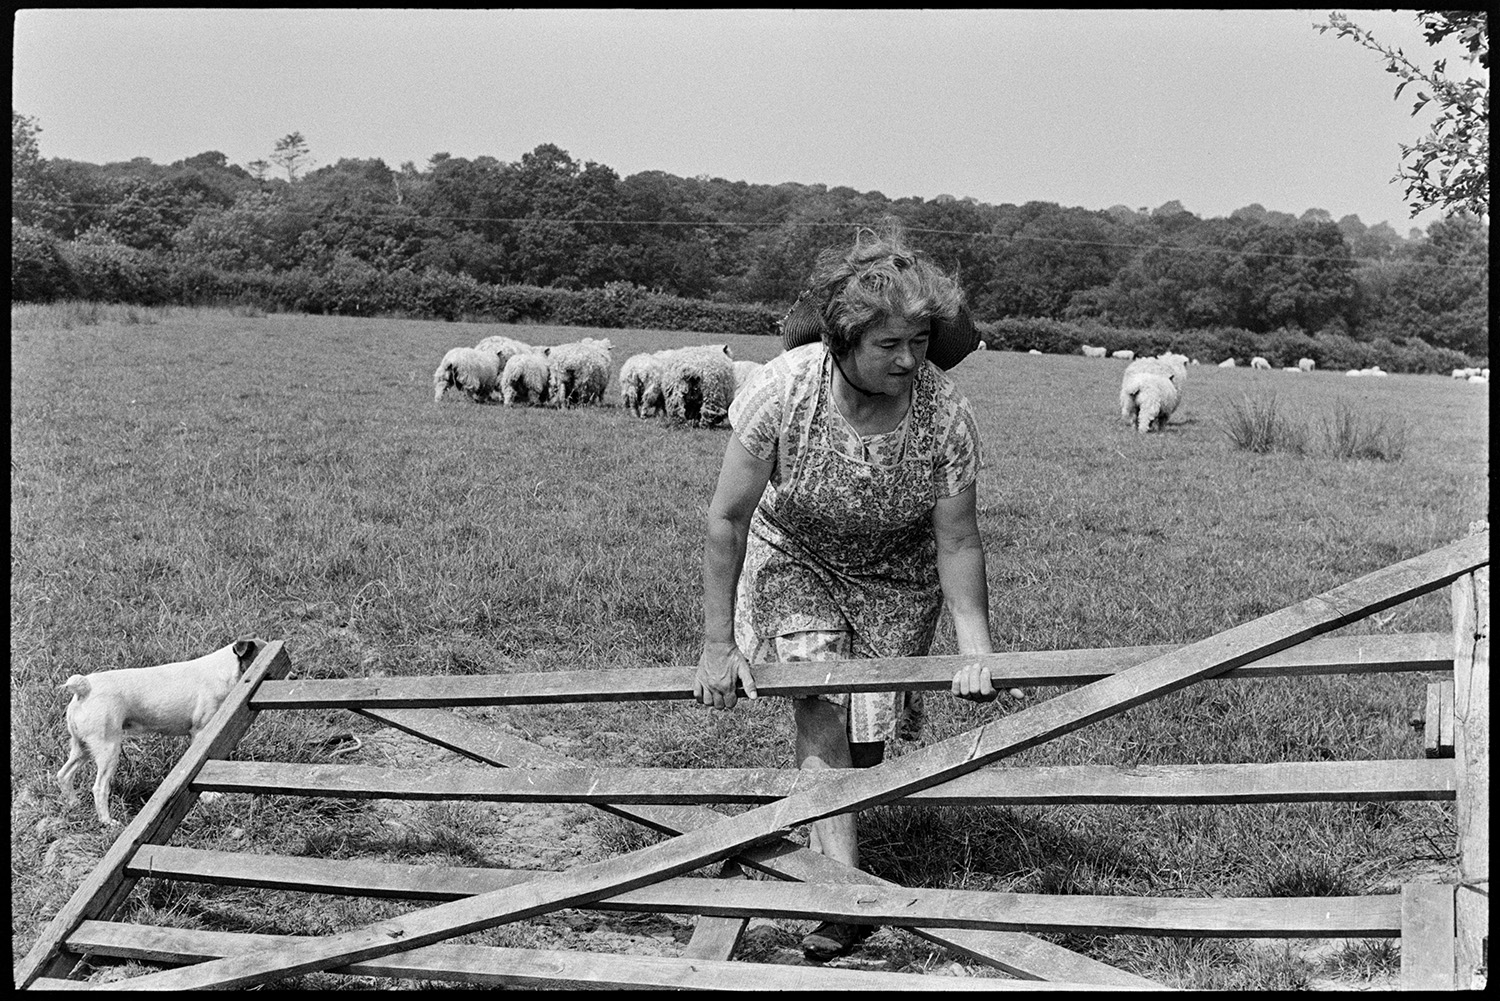 Woman checking sheep. 
[Mrs Oke checking a small flock of sheep in a field at Deckport, Hatherleigh. She is lifting a wooden field gate and is accompanied by a dog.]